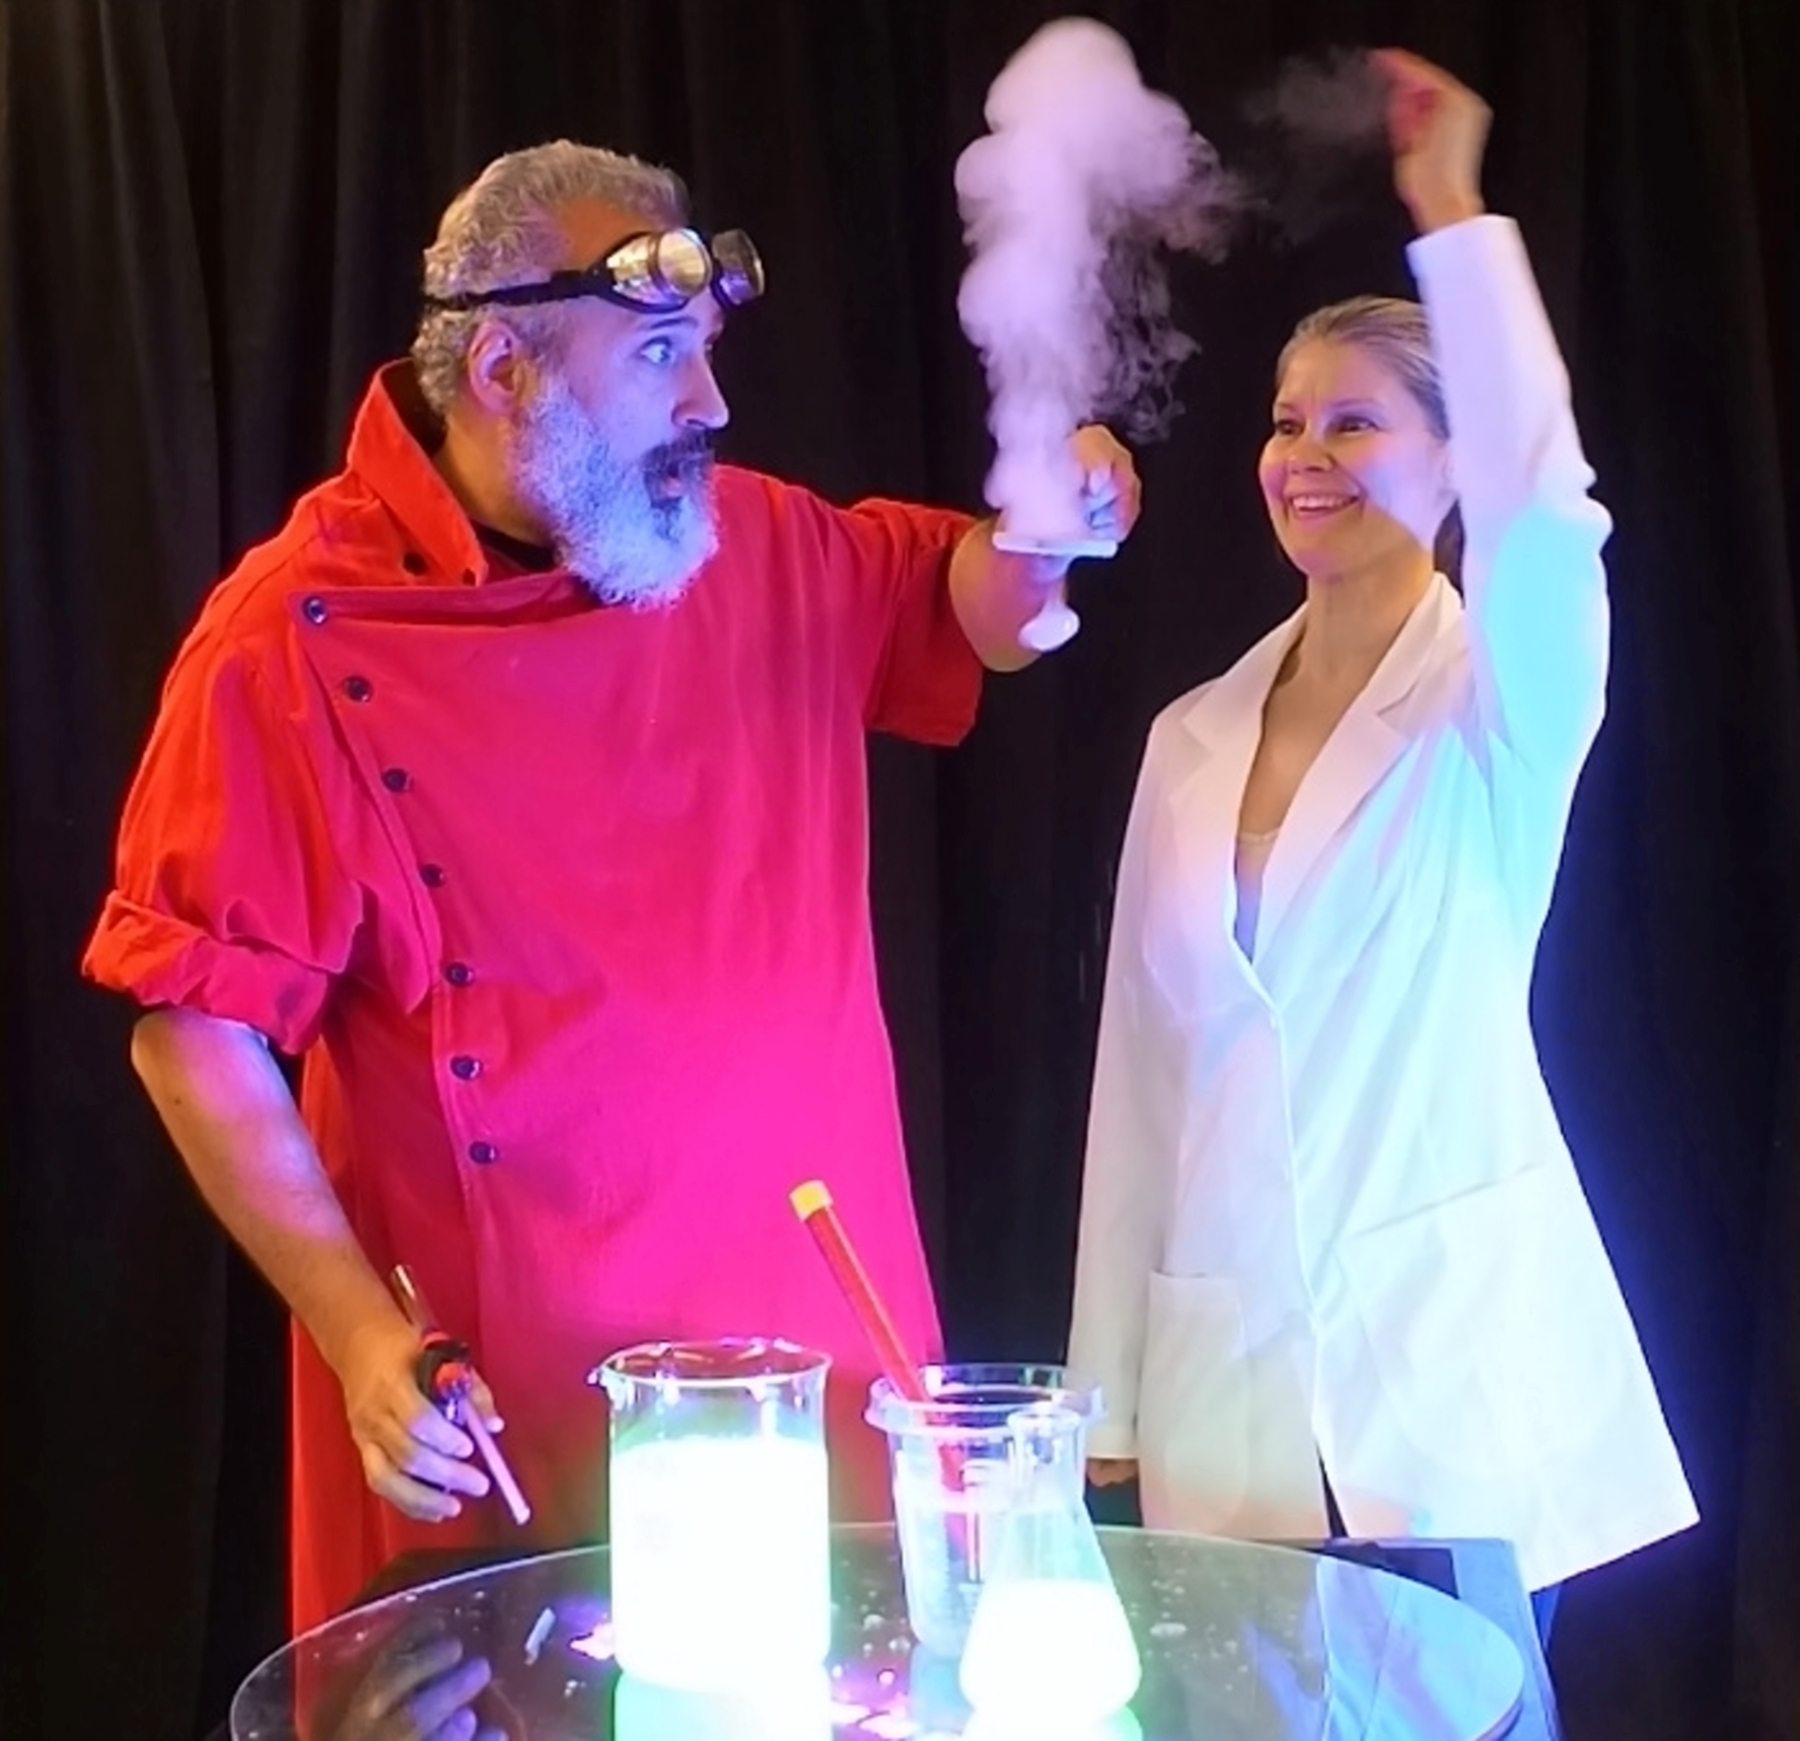 Crazy Science Bubble Show with Professor Suds